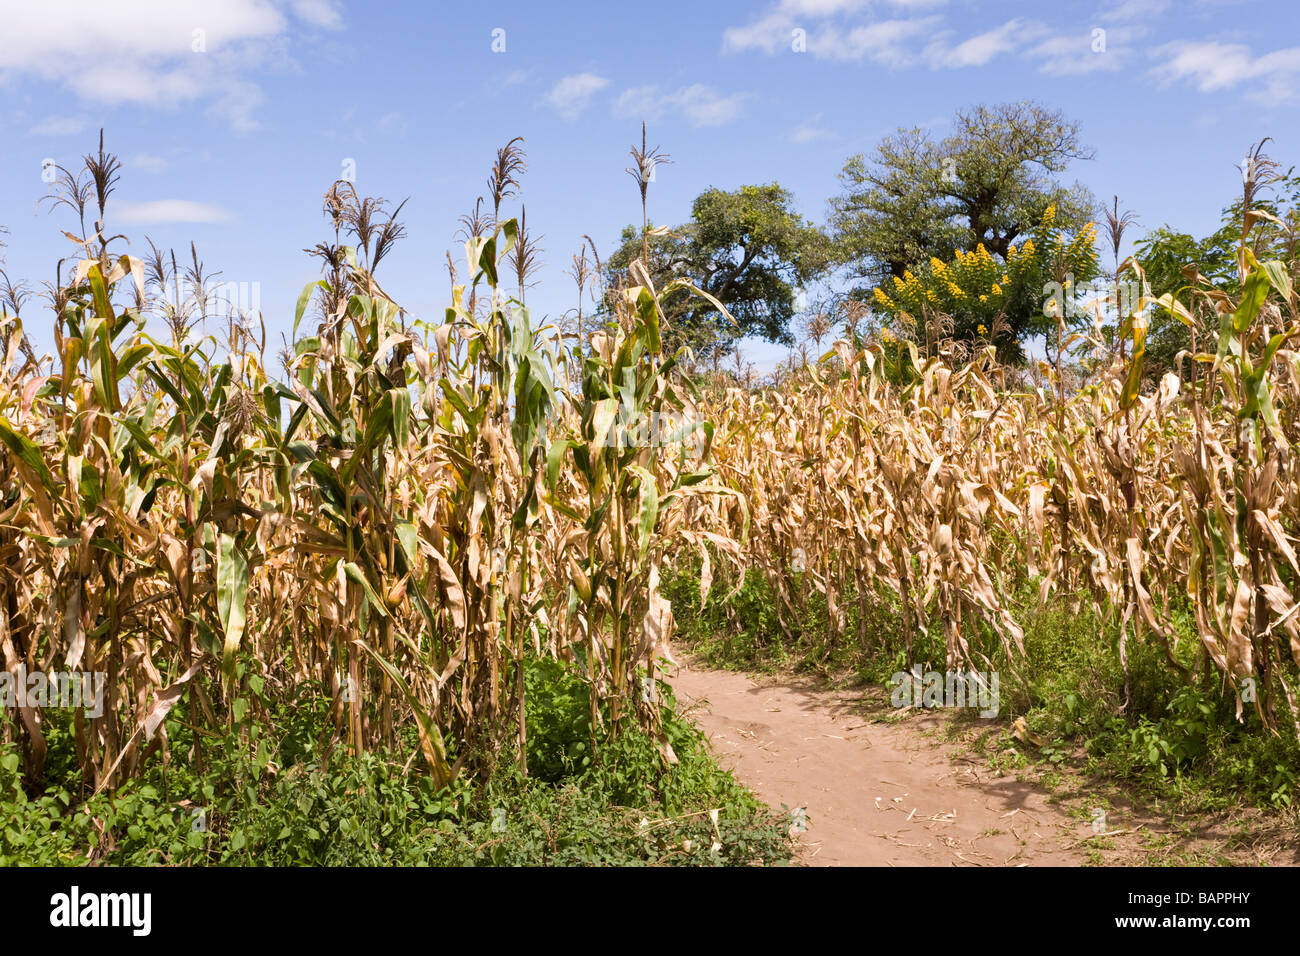 Maize ripening in the village of Nyombe, Malawi, Africa Stock Photo